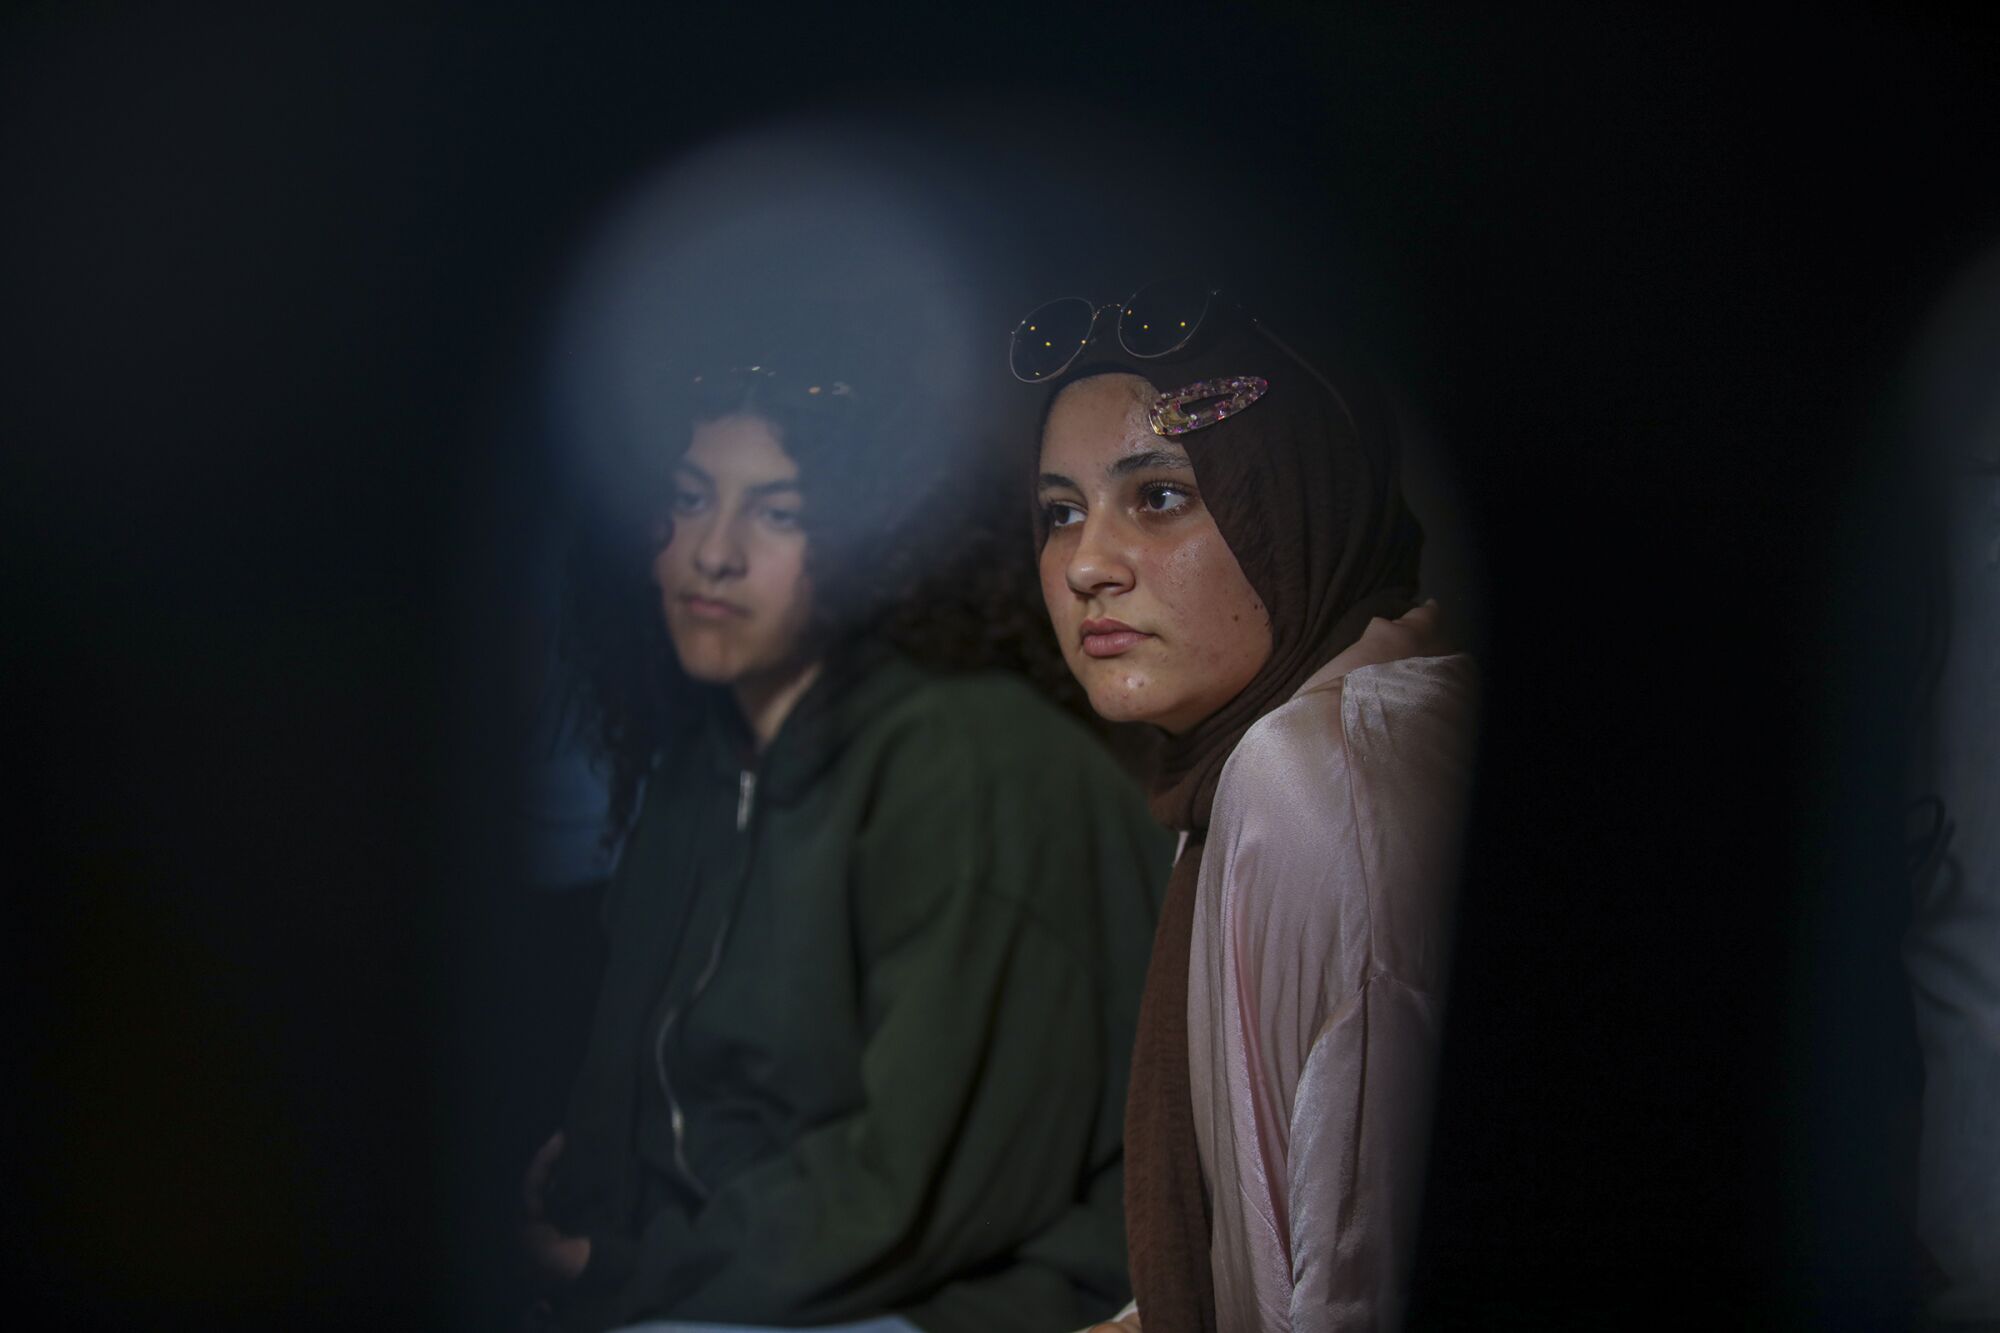 Dalal Oyoun, 17, left, and Hana Nashawati, 18, have dealt with discrimination for being Muslim.